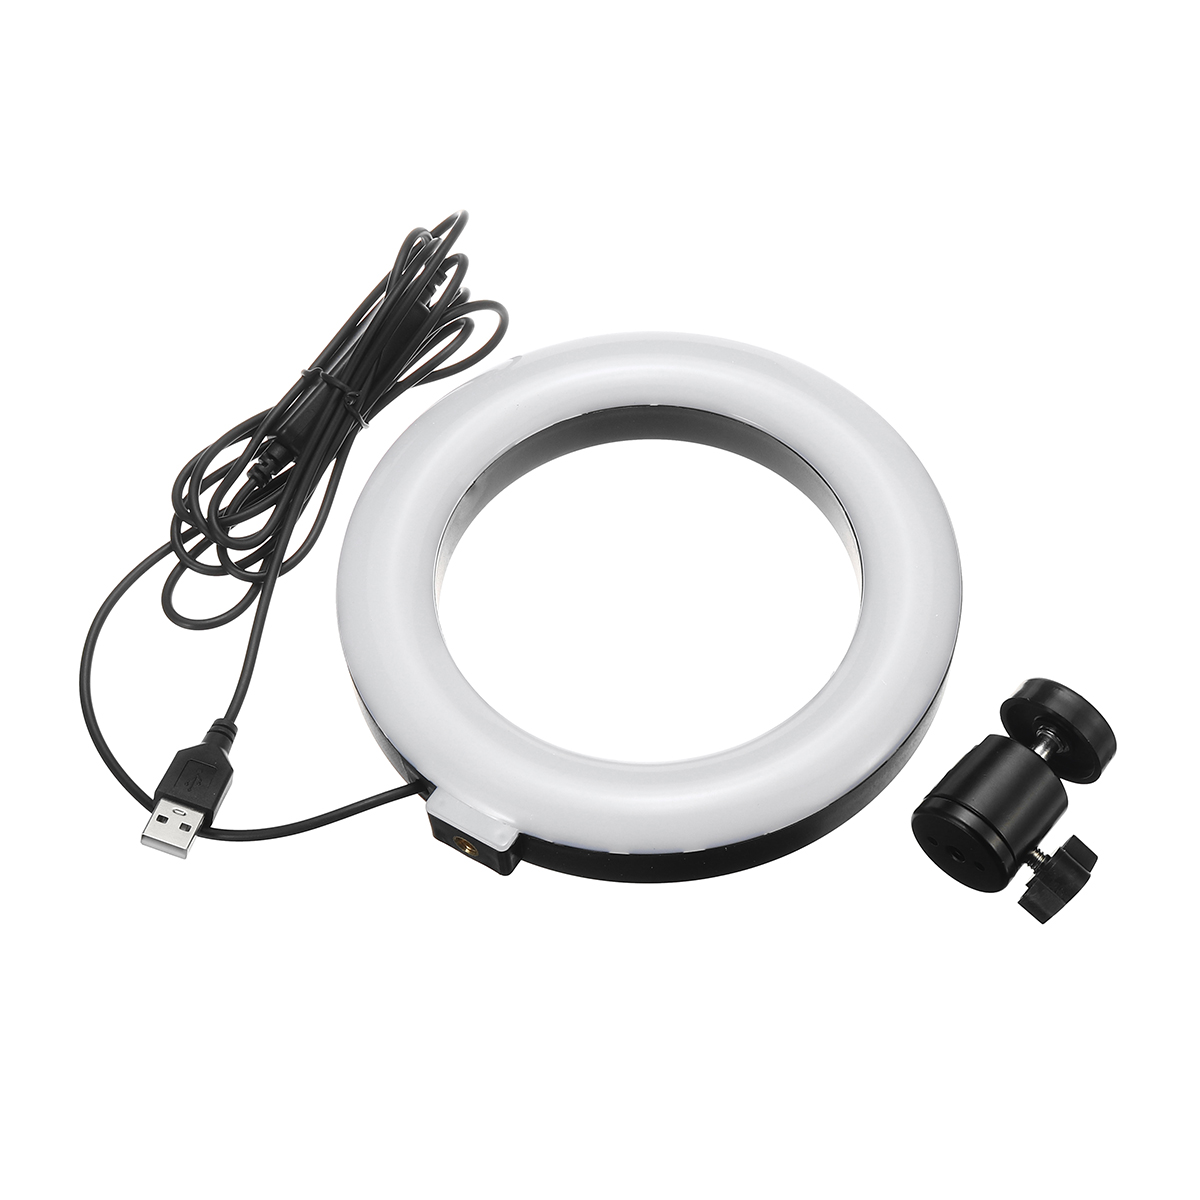 Photography-LED-Mirrors-Selfie-Ring-Light-260MM-Dimmable-Camera-Phone-Lamp-Fill-Light-with-Table-Tri-1632273-8